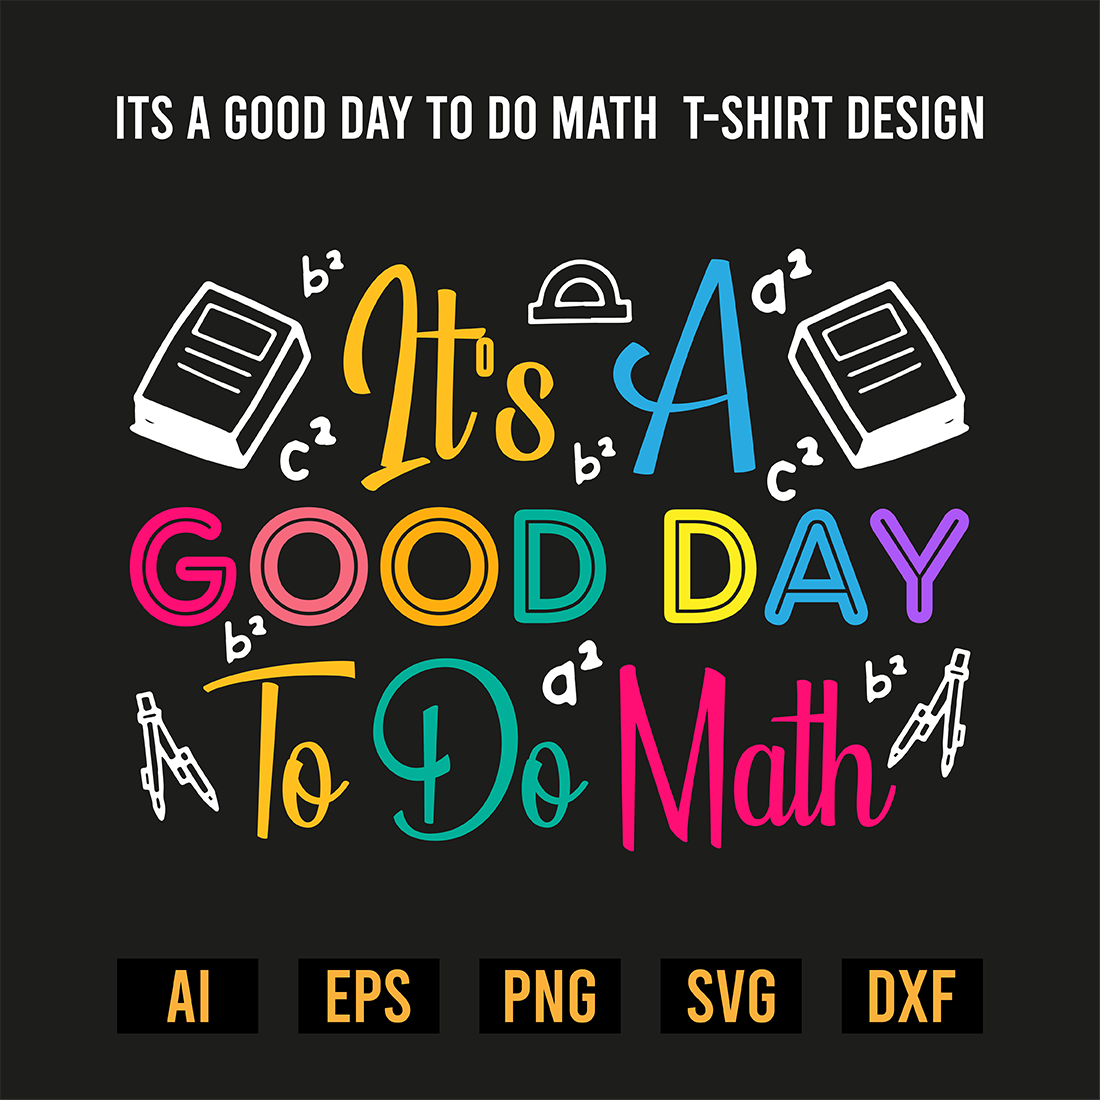 Its A Good Day To Do Math T-Shirt Design cover image.